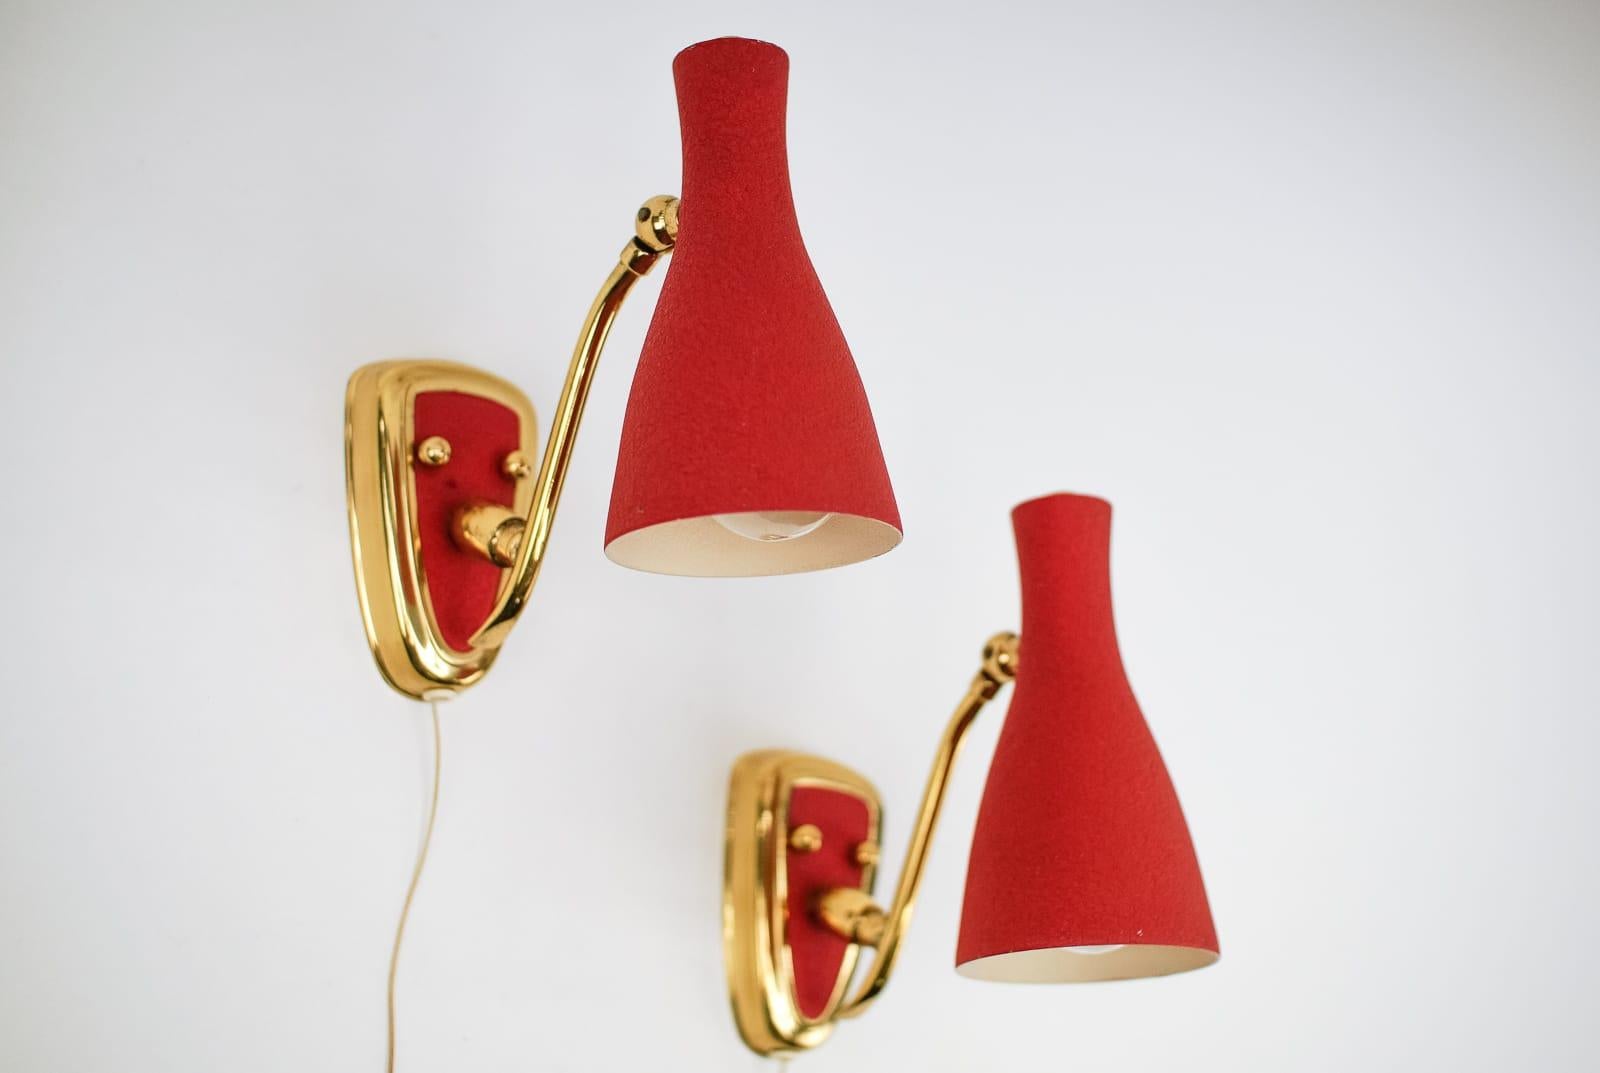 Italian Pair of Swivel Mid-Century Modern Wall Lamps, 1950s Italy For Sale